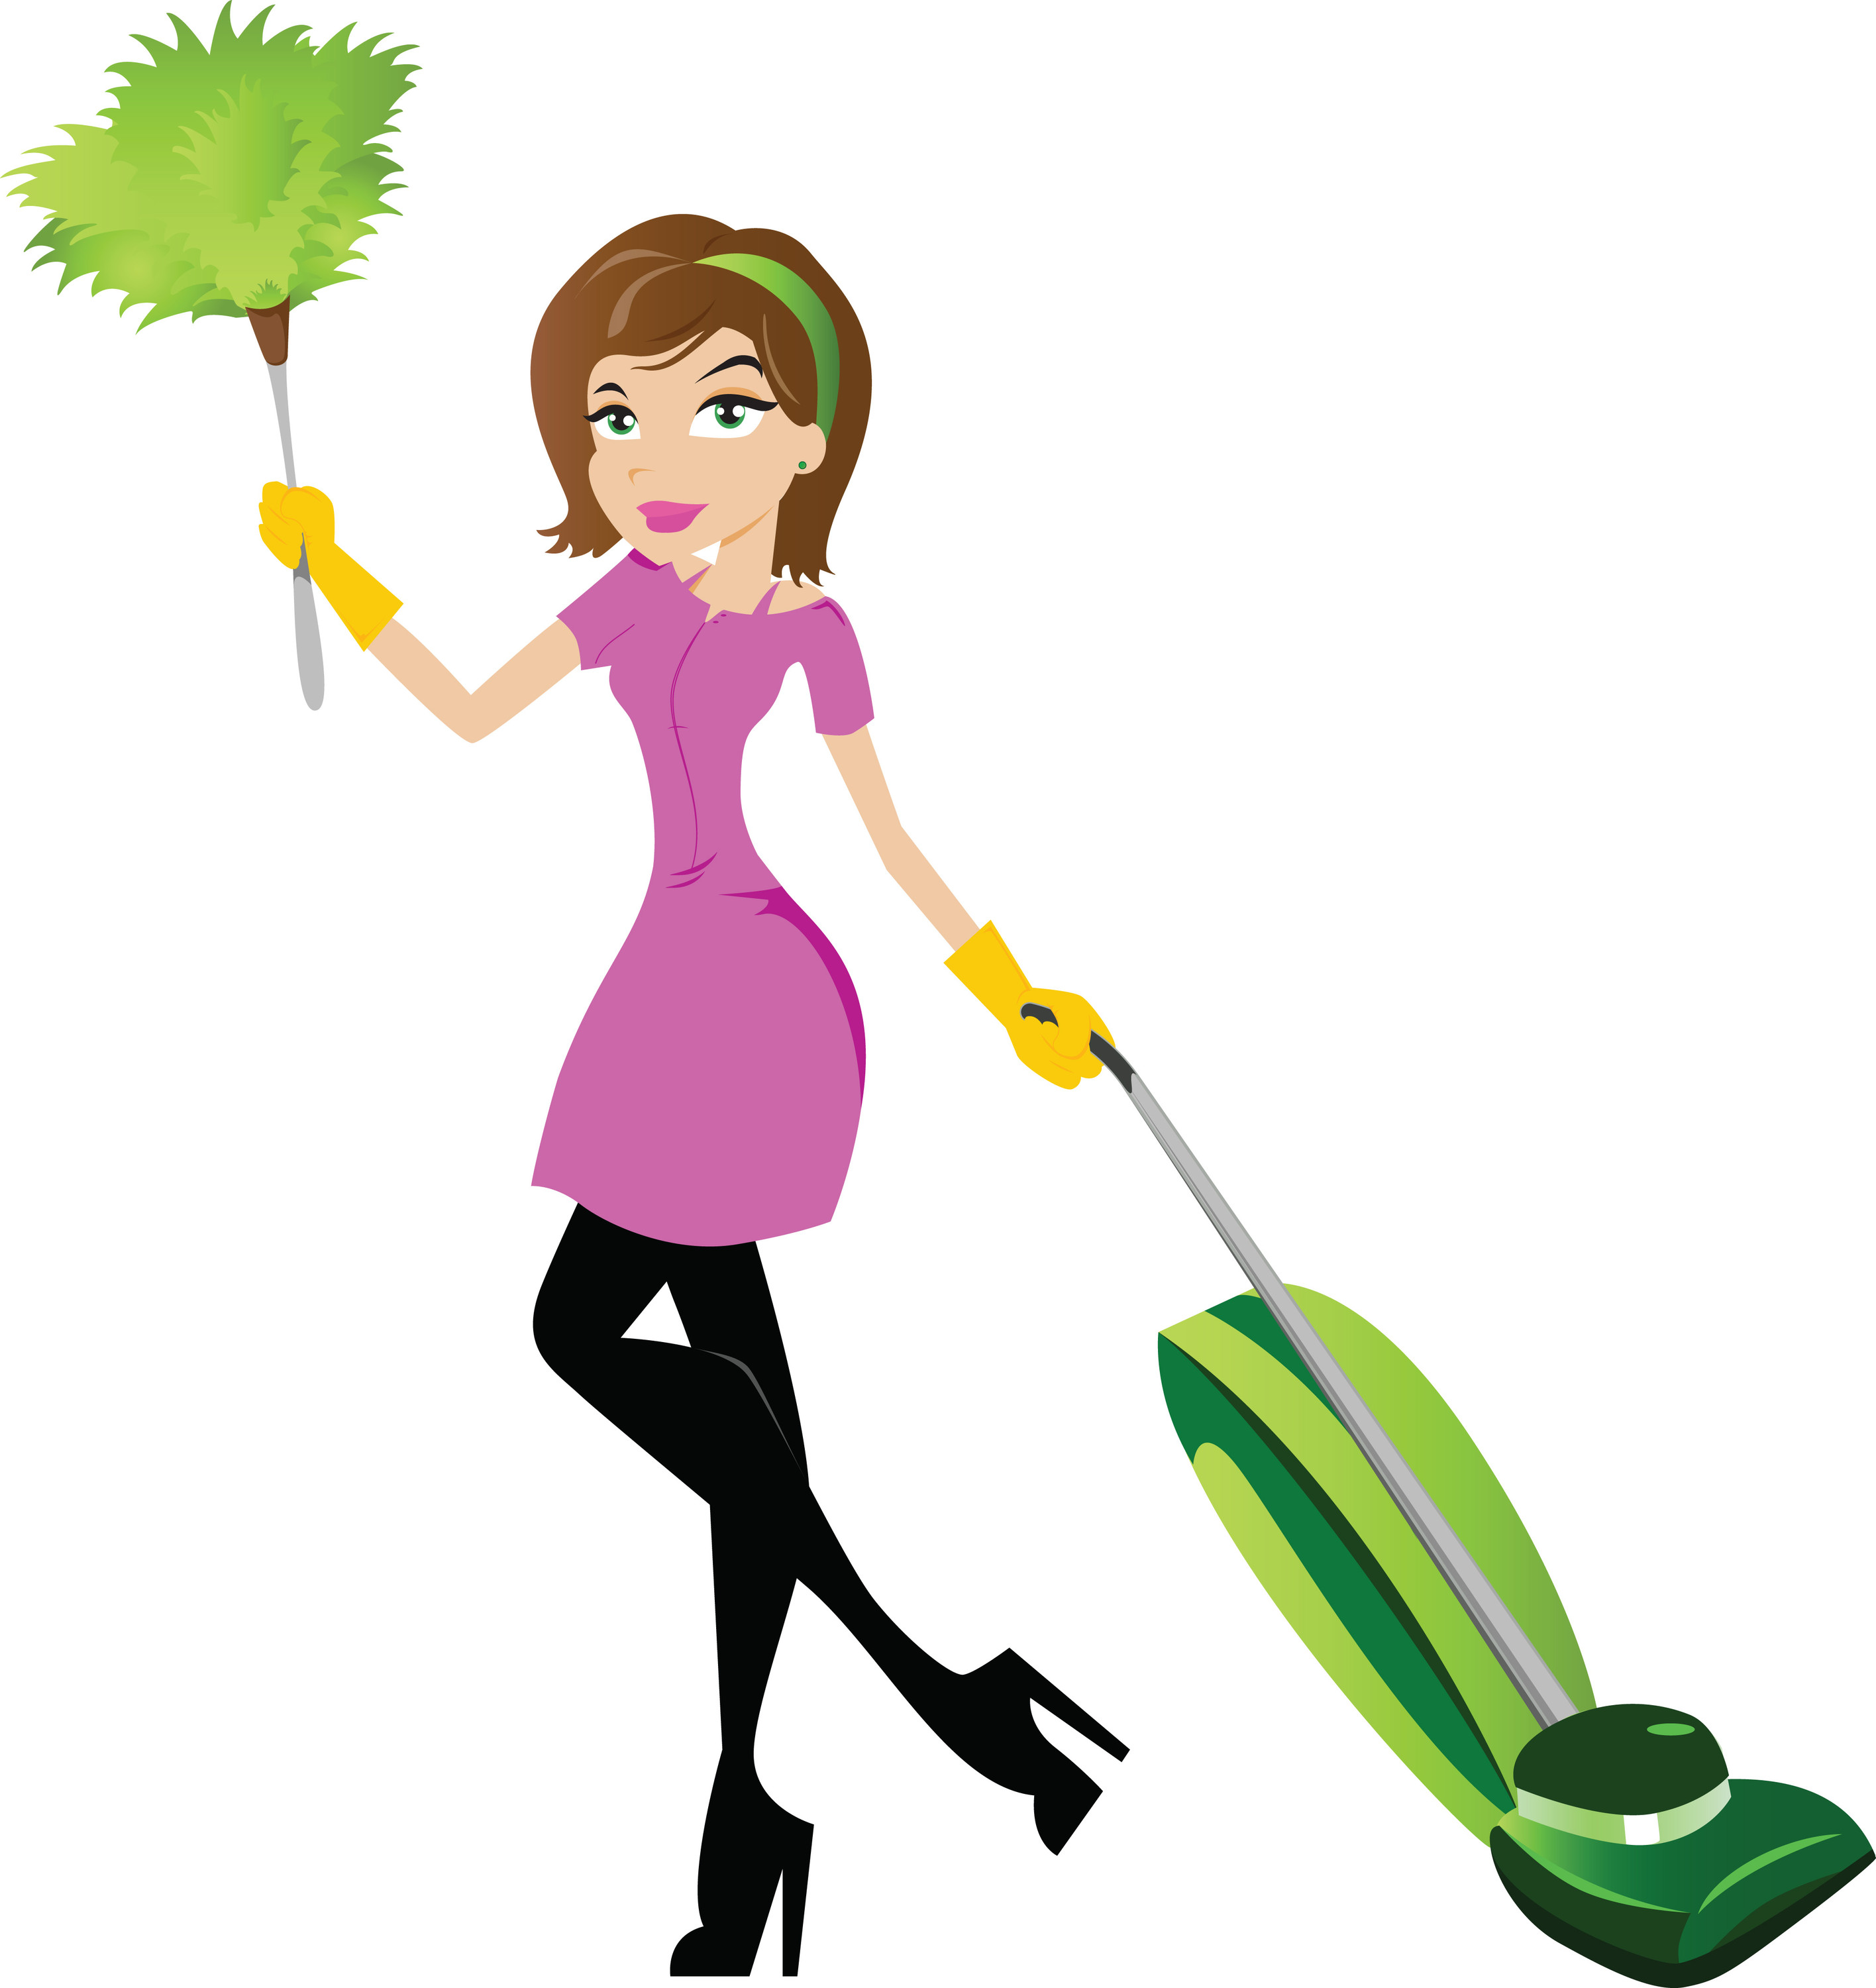 free clipart images woman - photo #27